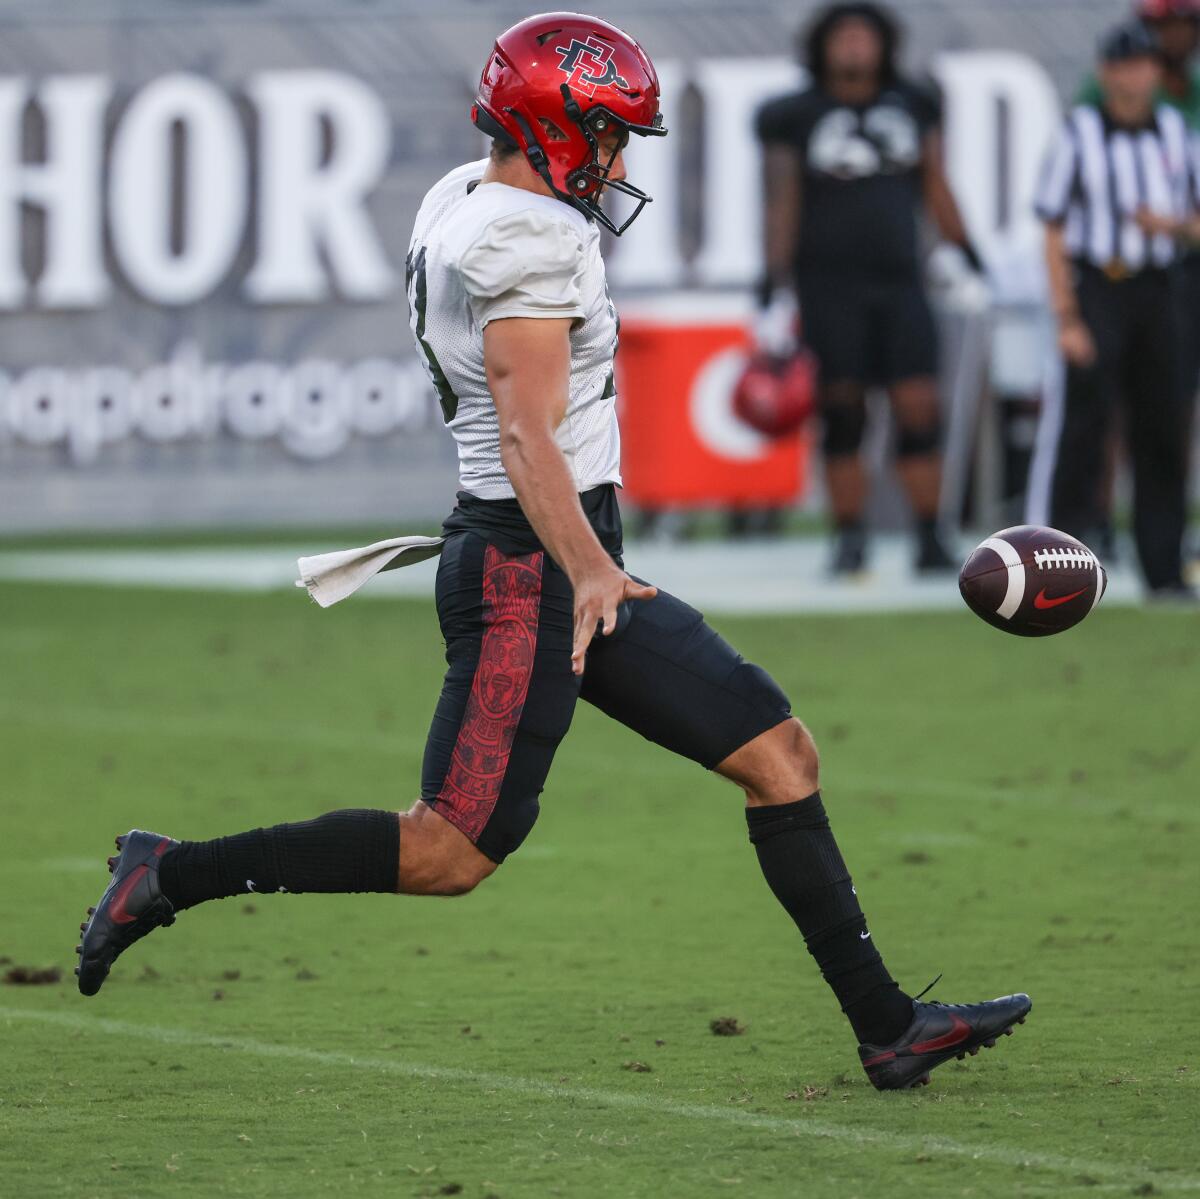 San Diego State's Jack Browning, who averaged 45.4 yards a punt last season, signs with the Buffalo Bills.